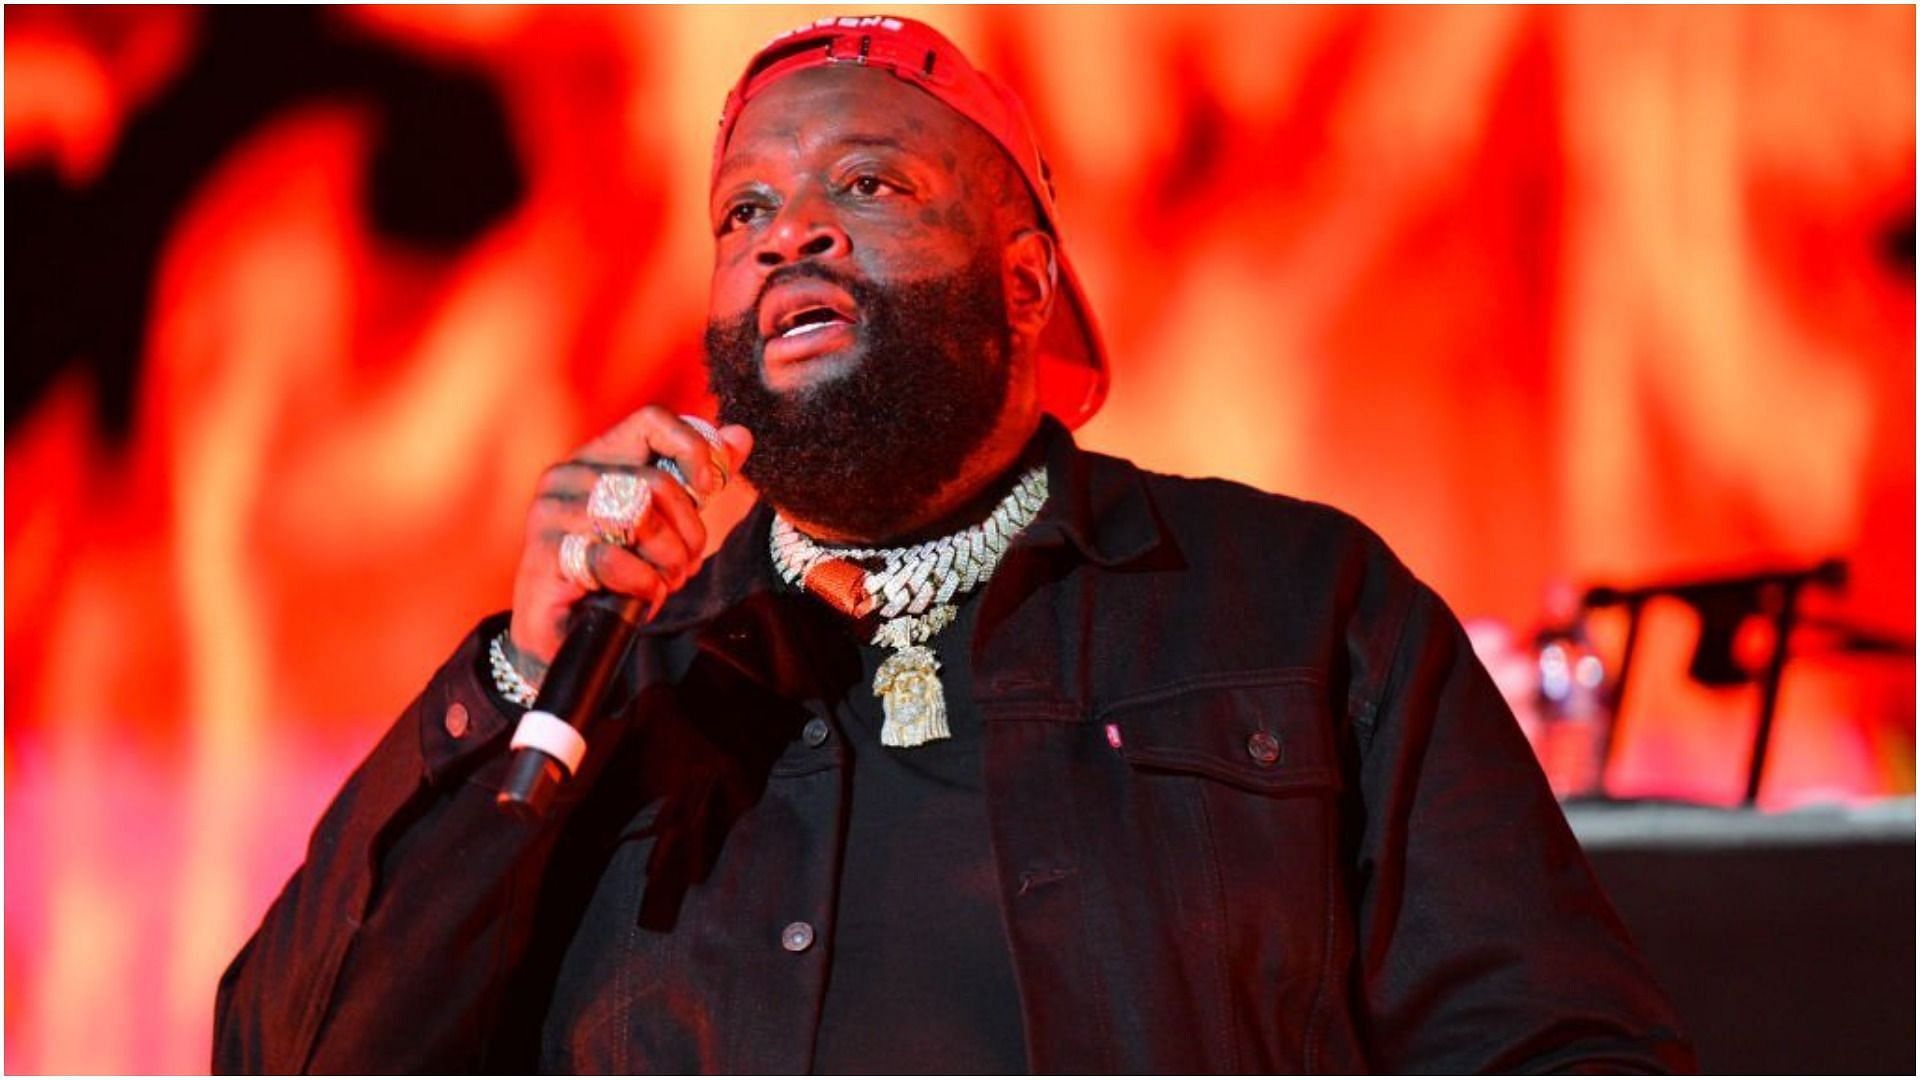 Rick Ross showed off the latest addition to his car collection in an Instagram post (Image via Prince Williams/Getty Images)